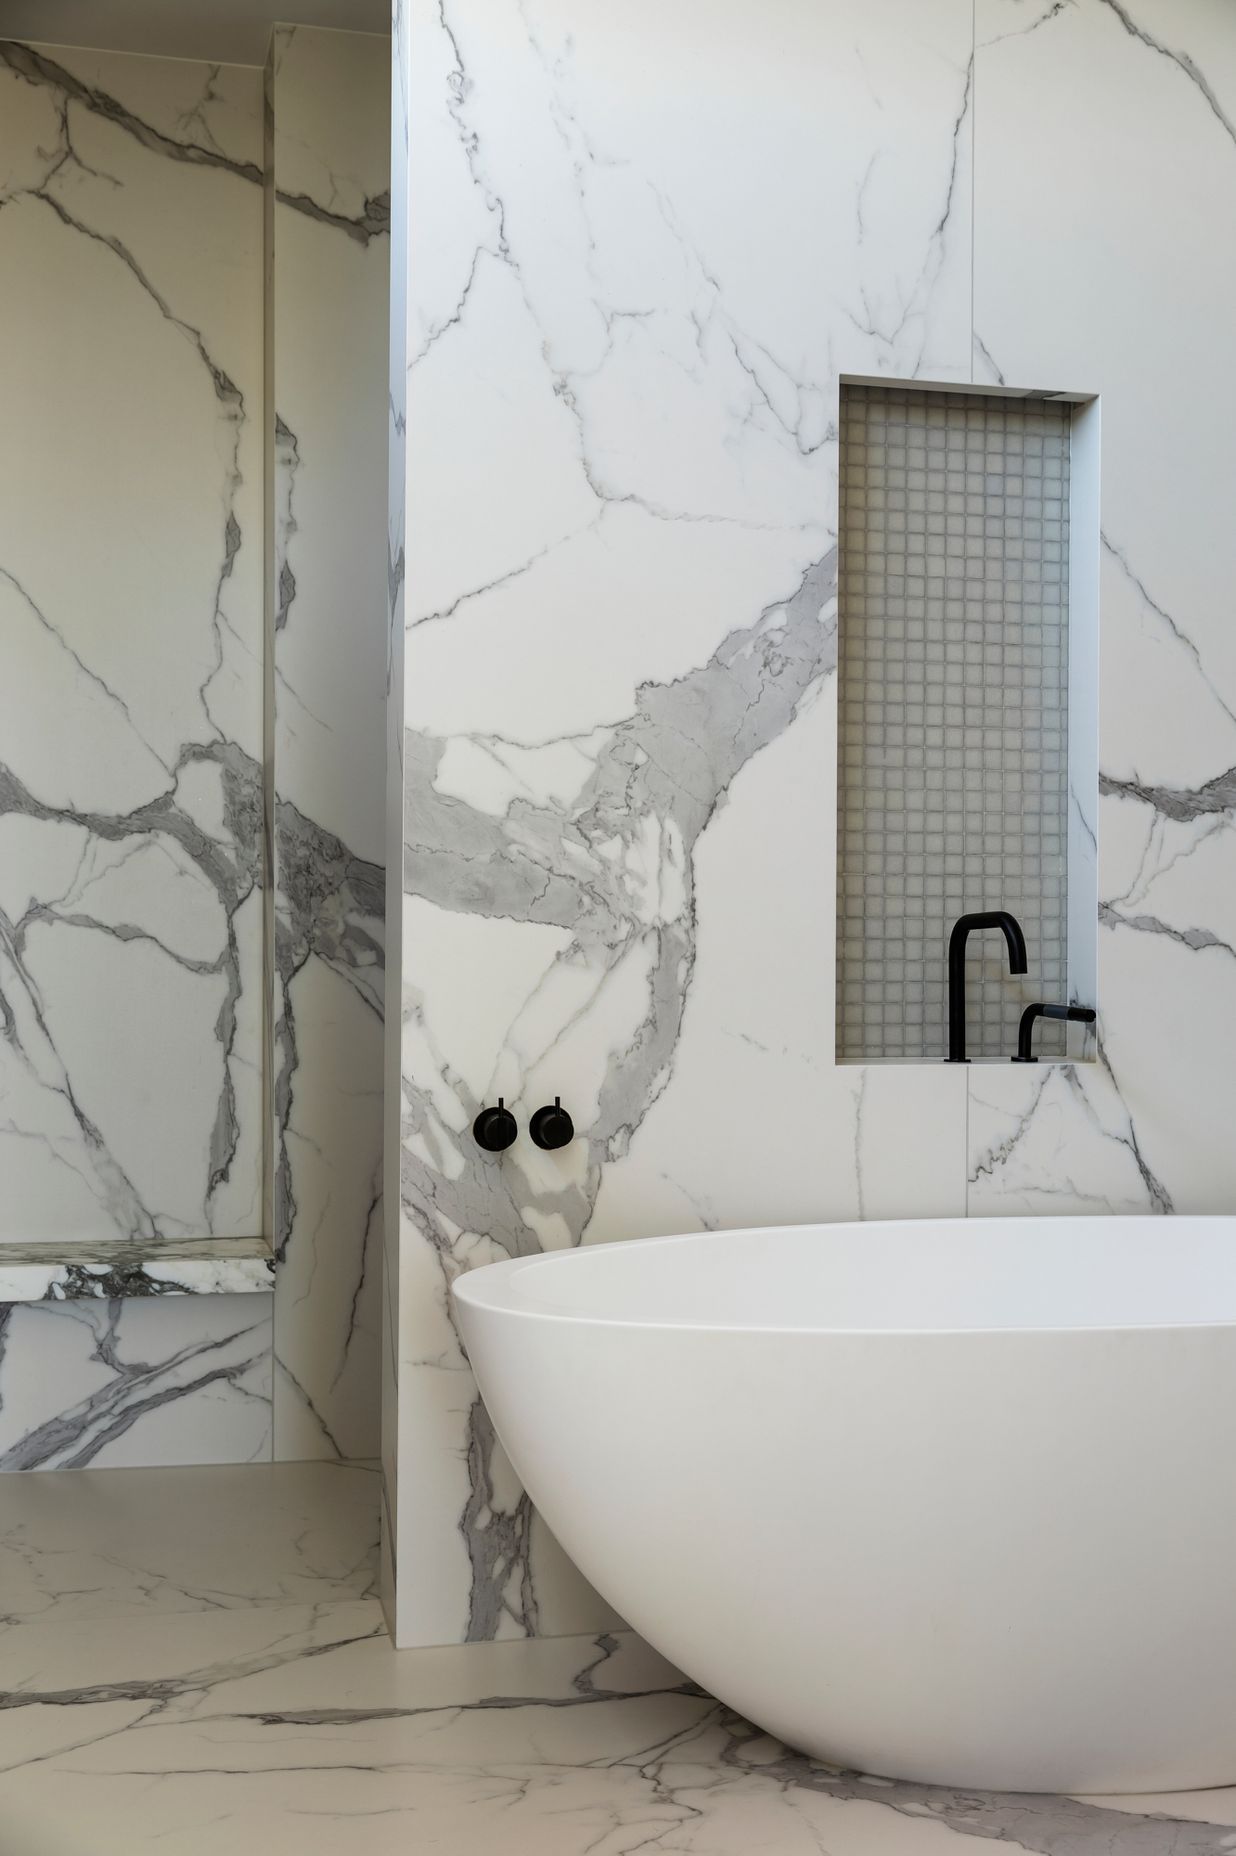 A curvaceous bath echoes the curved walls seen in some of the smaller rooms.